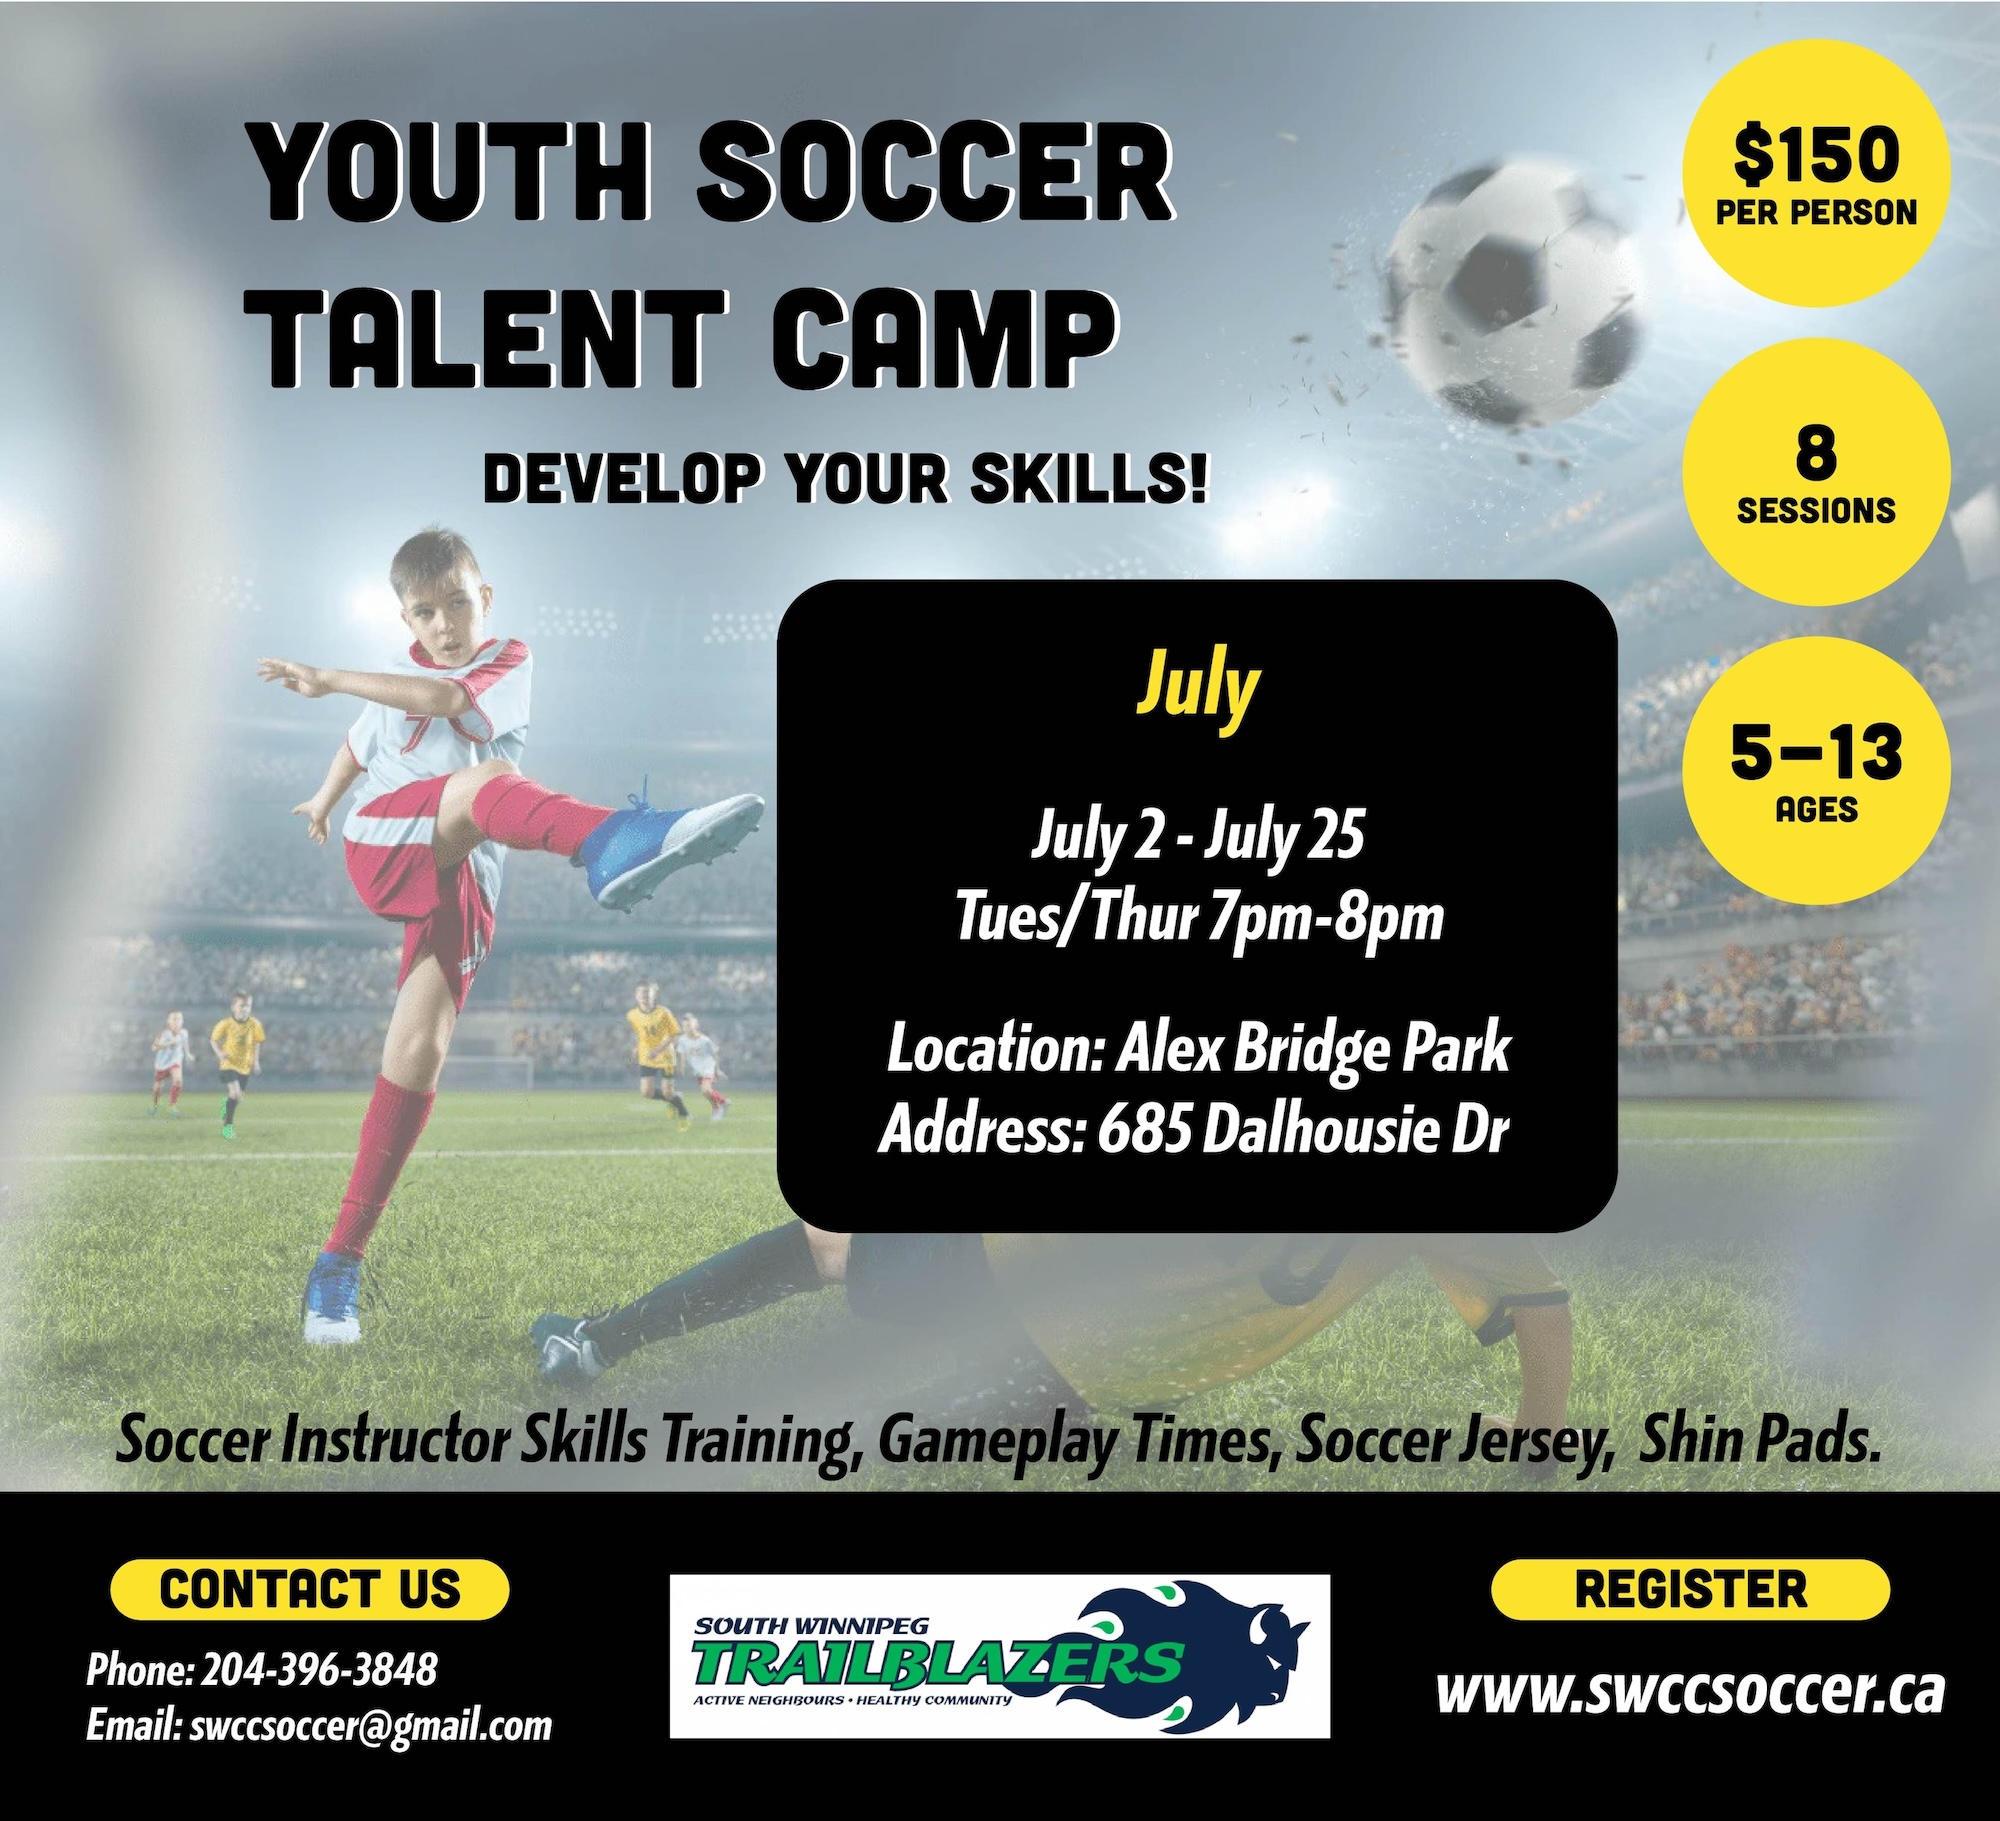 Youth Soccer Talent Camp